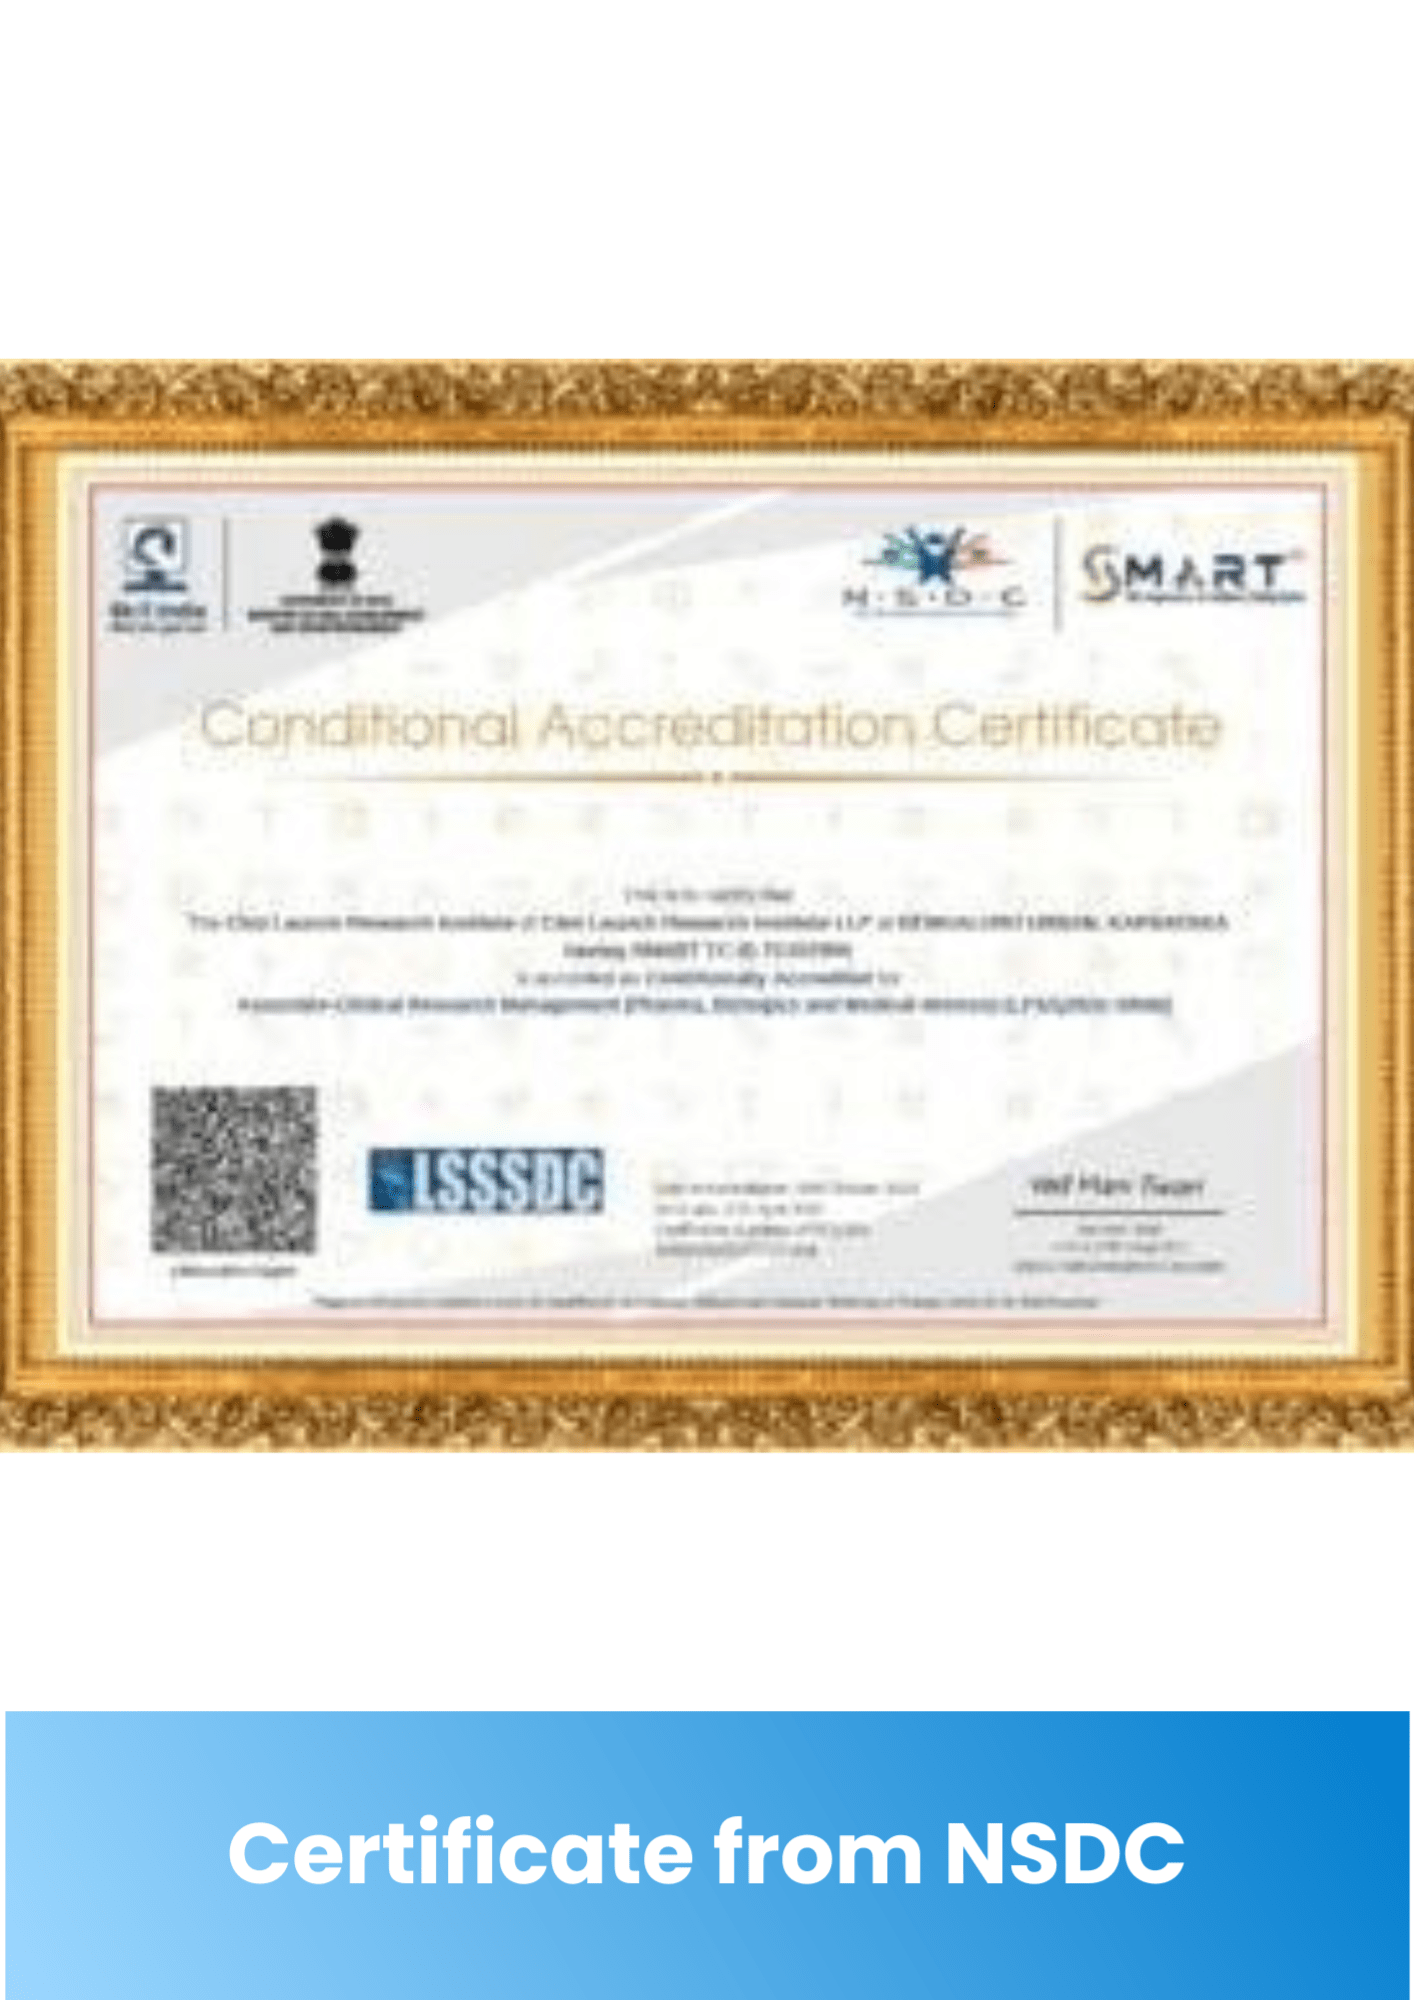 CONDITIONAL ACCREDITION CERTIFICATE